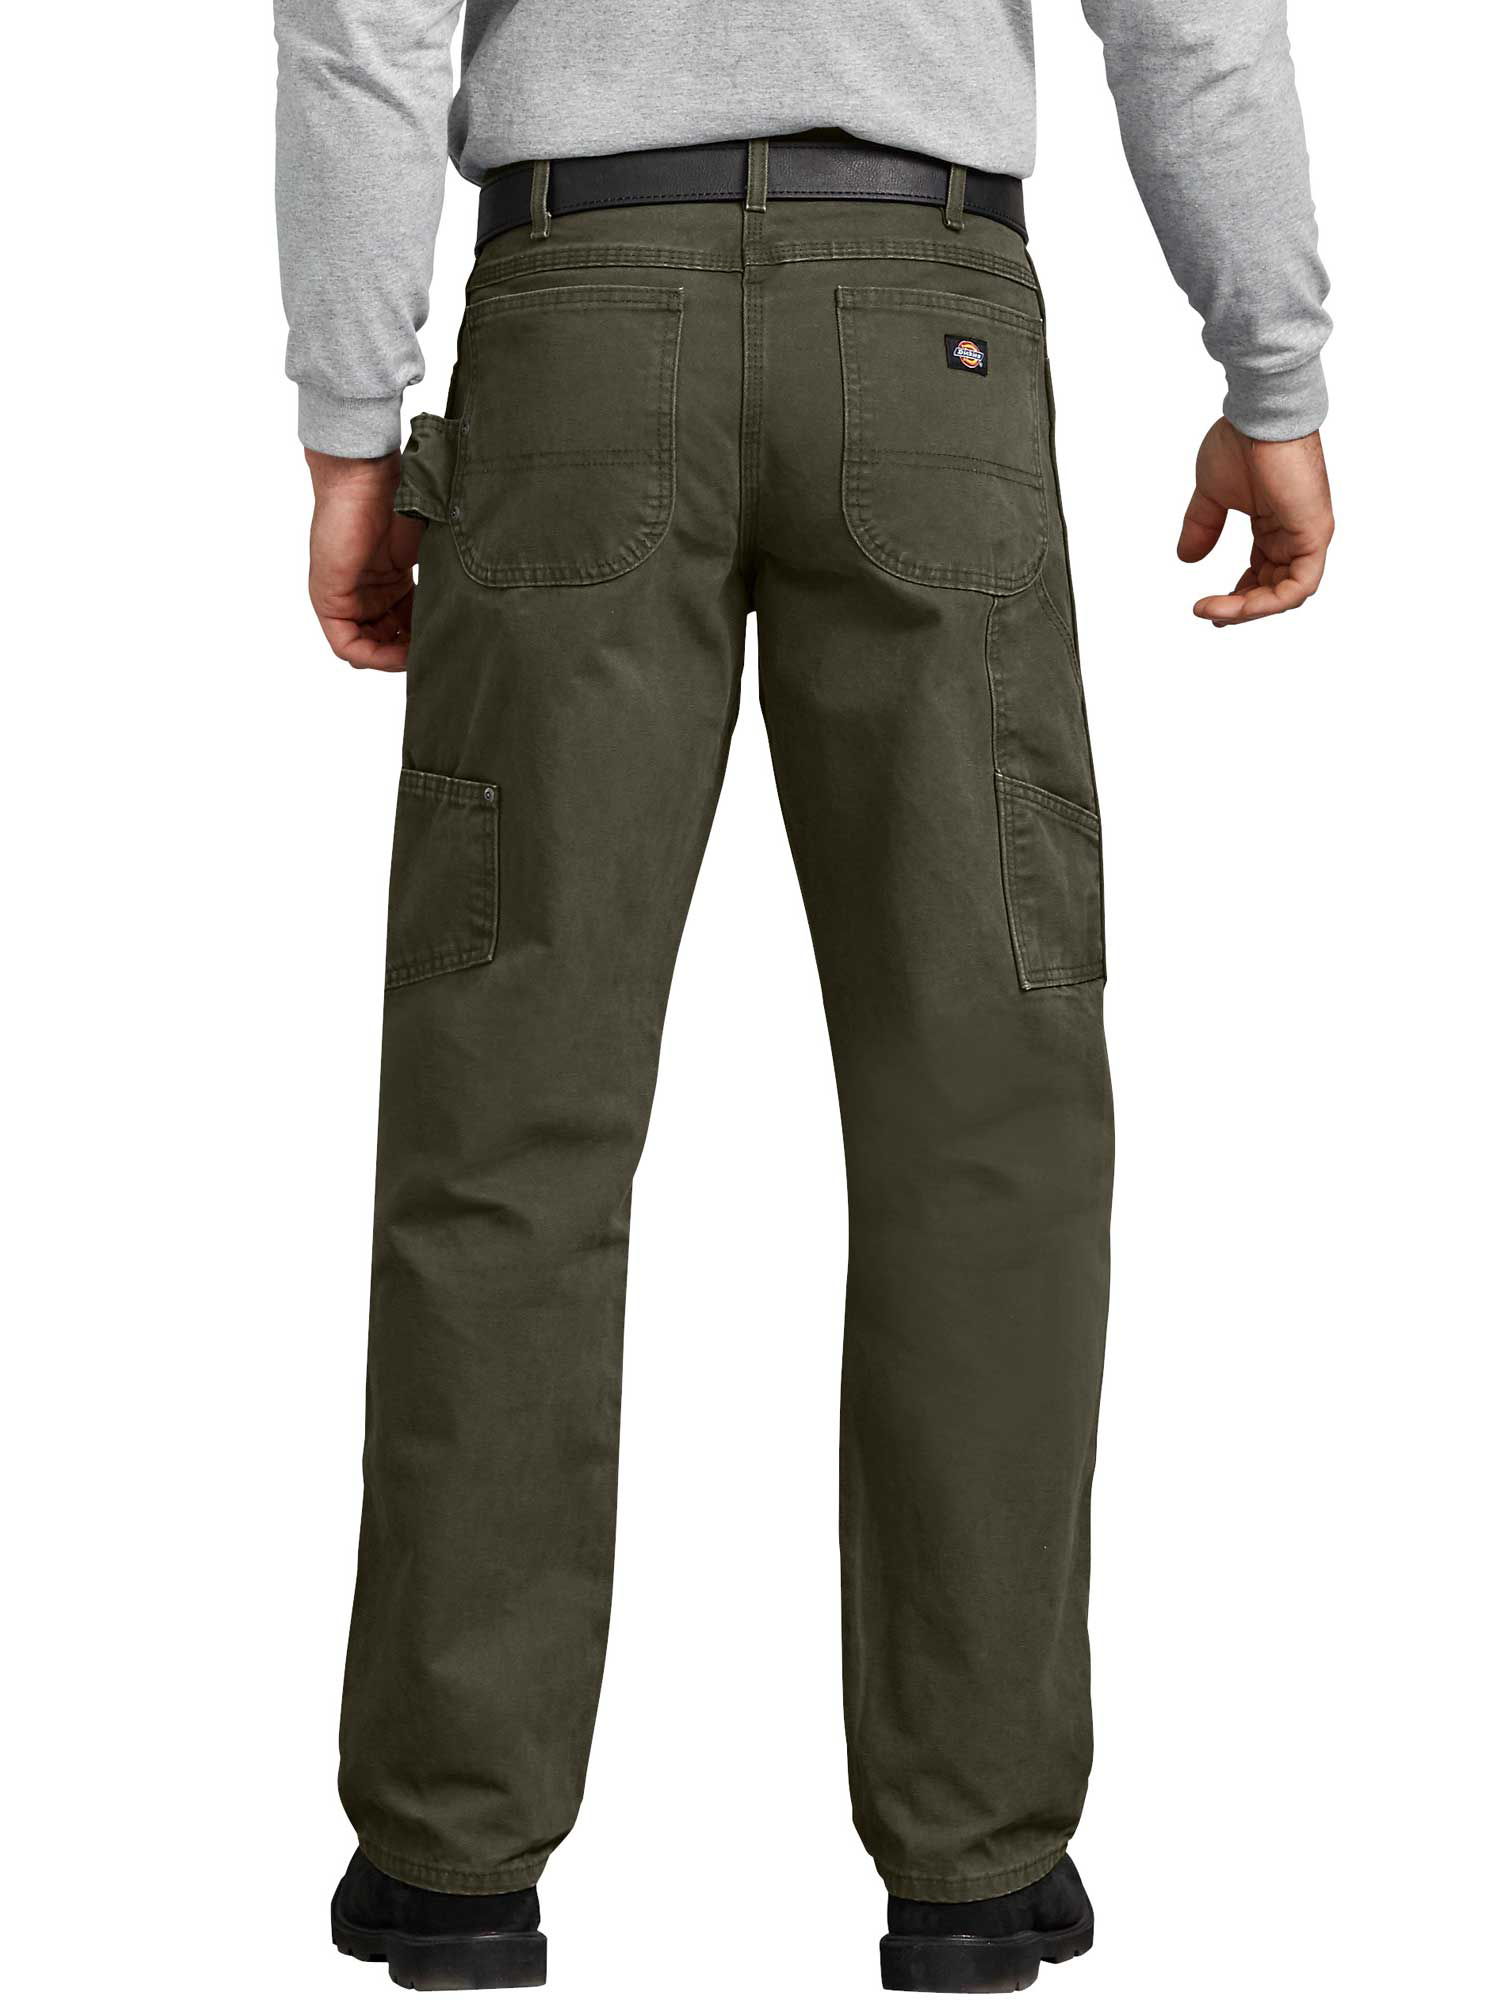 Dickies Mens and Big Mens Relaxed Fit Straight Leg Carpenter Duck Jeans - image 2 of 2